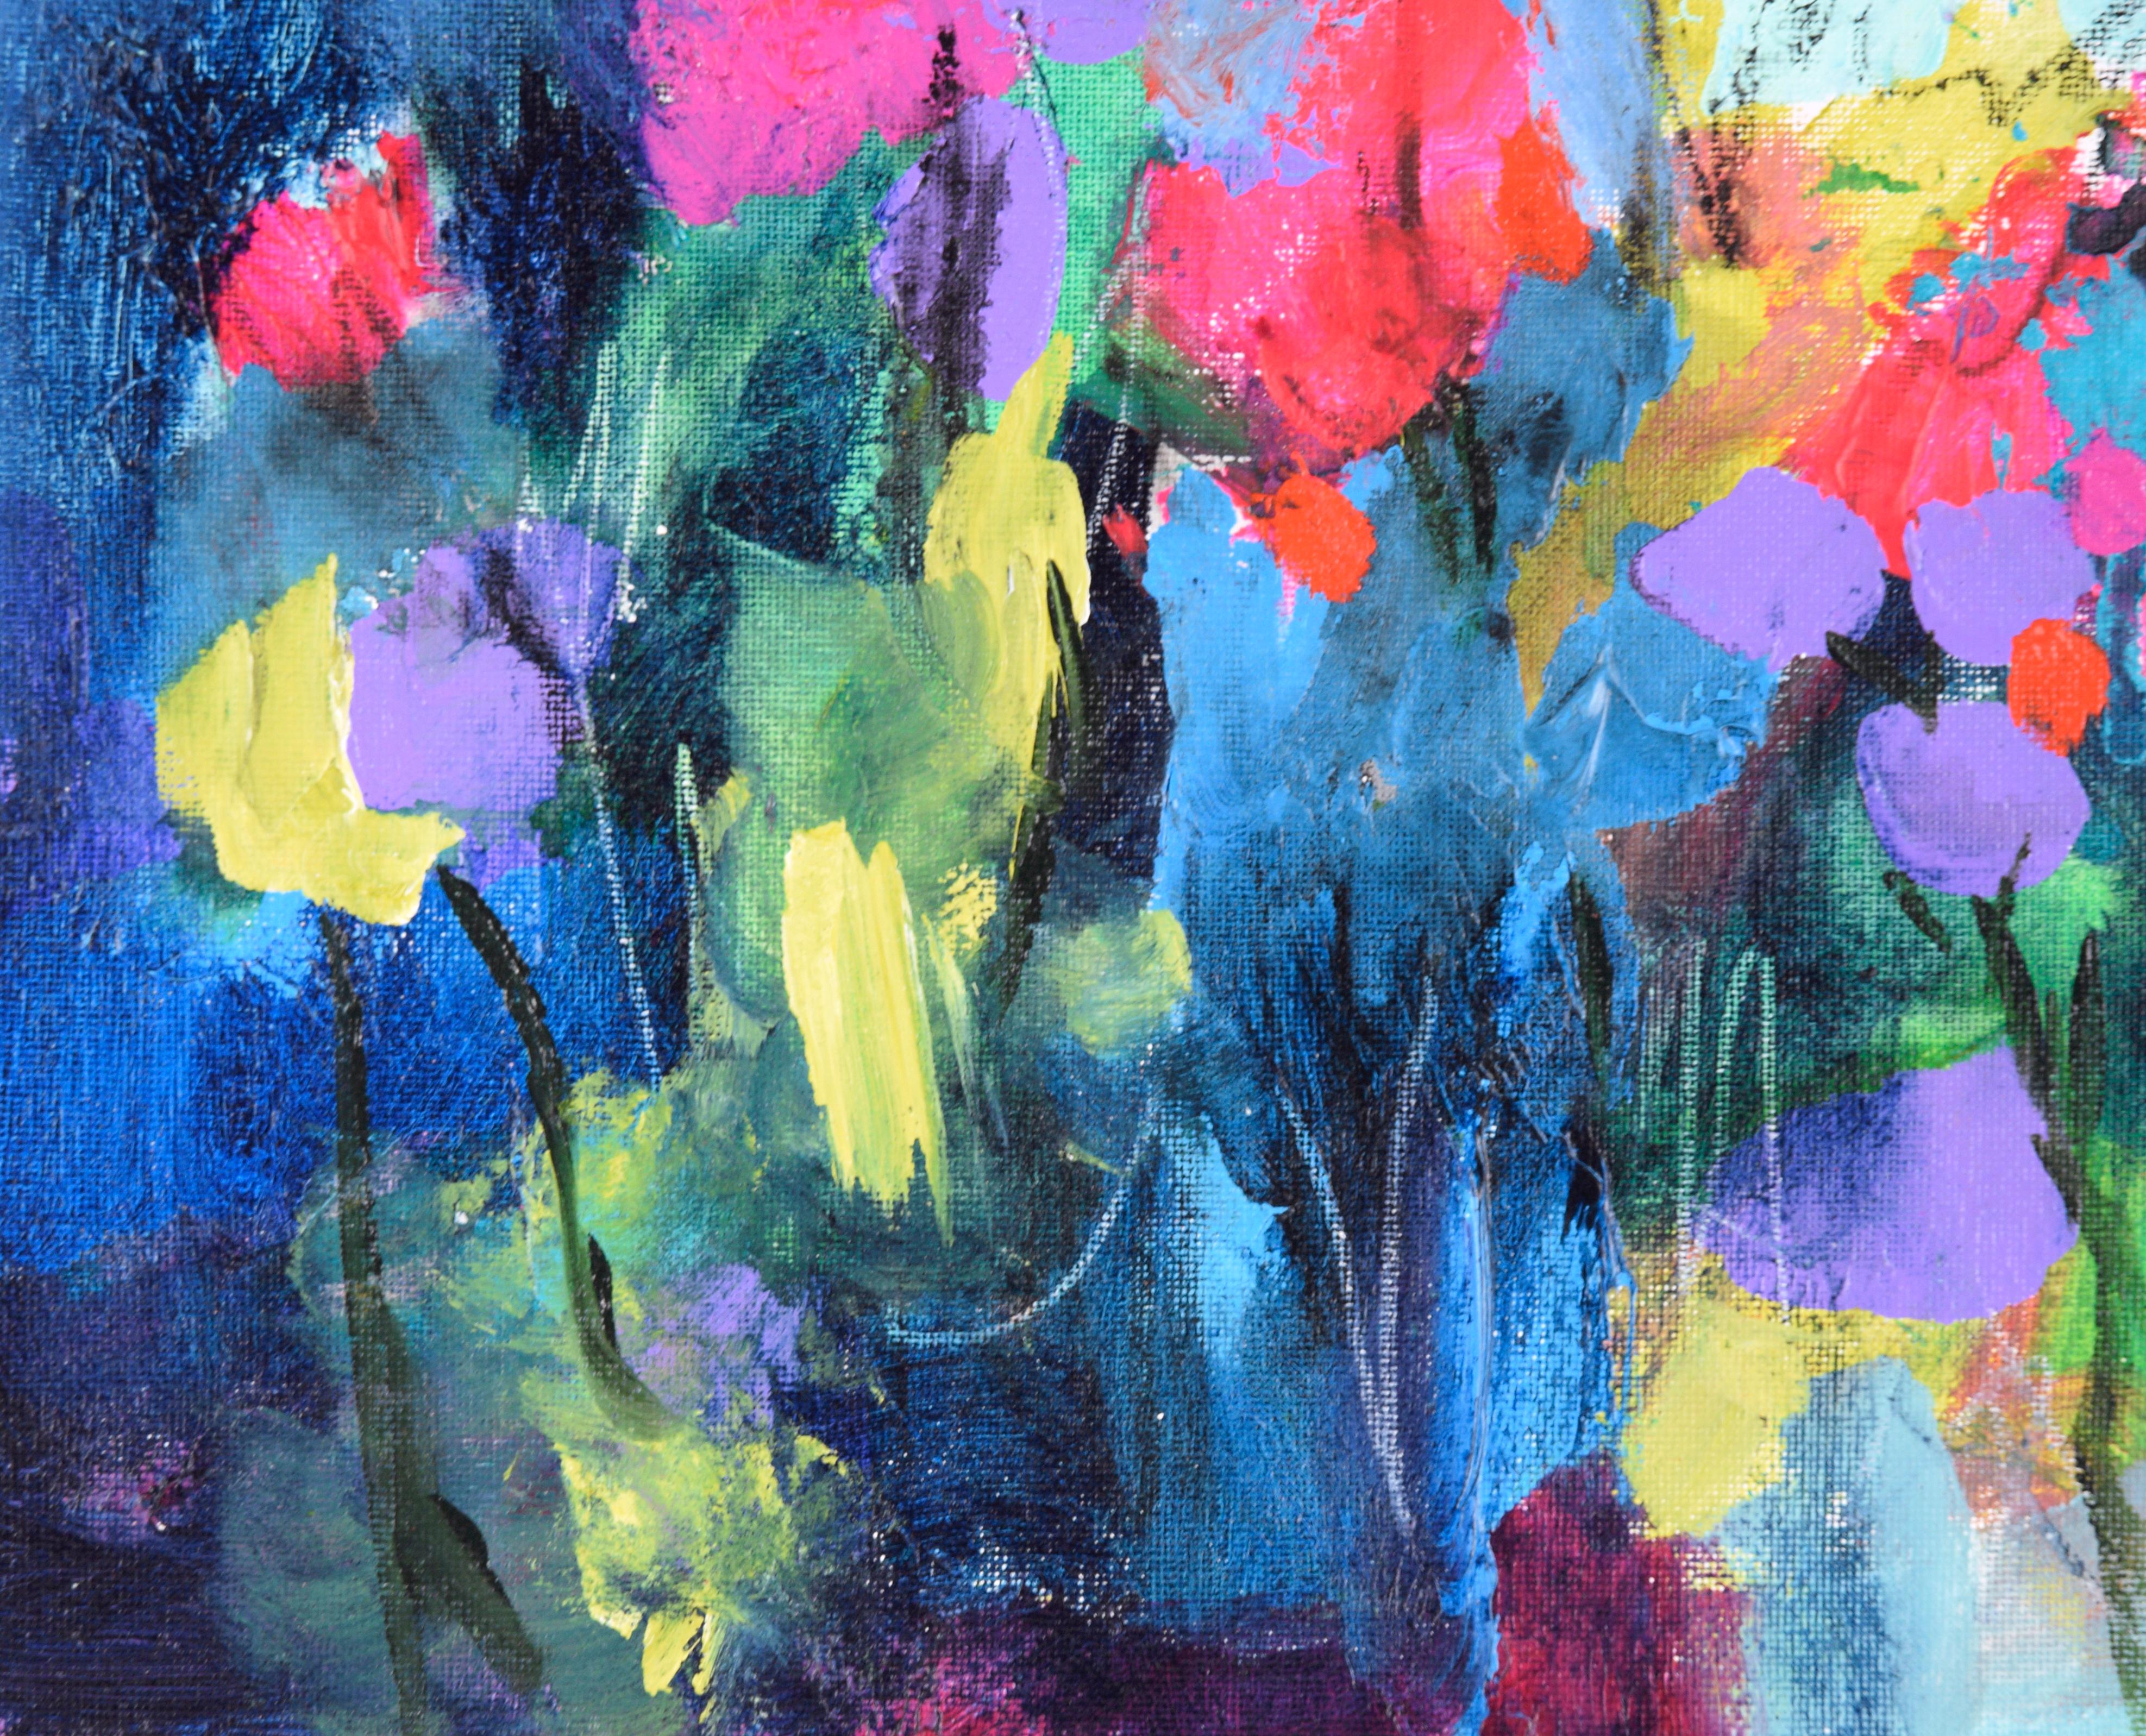 Abstracted Field of Flowers - Abstract Expressionist Painting by Ilana Ingber